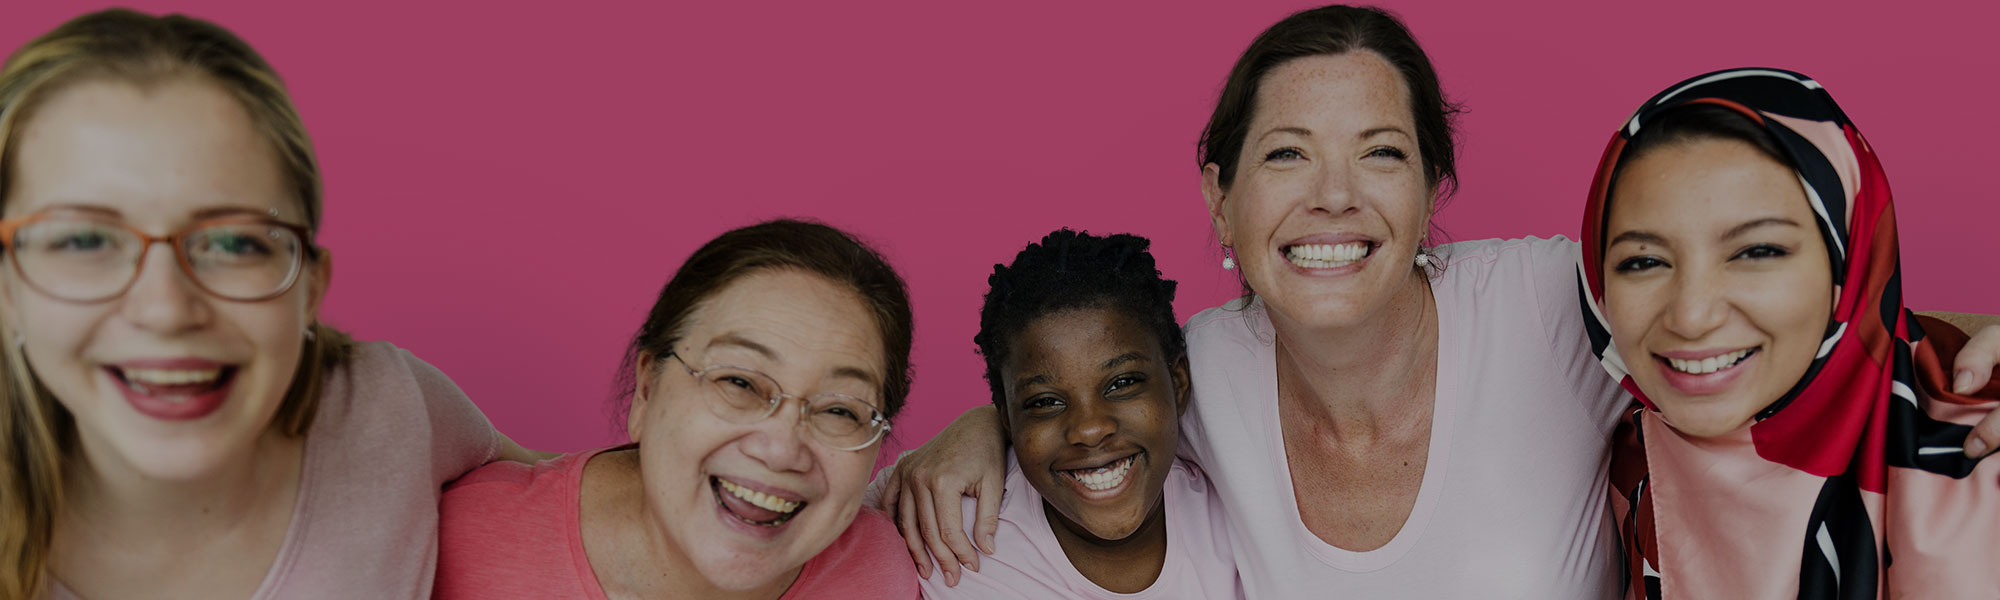 Group of women smiling at the camera on pink background